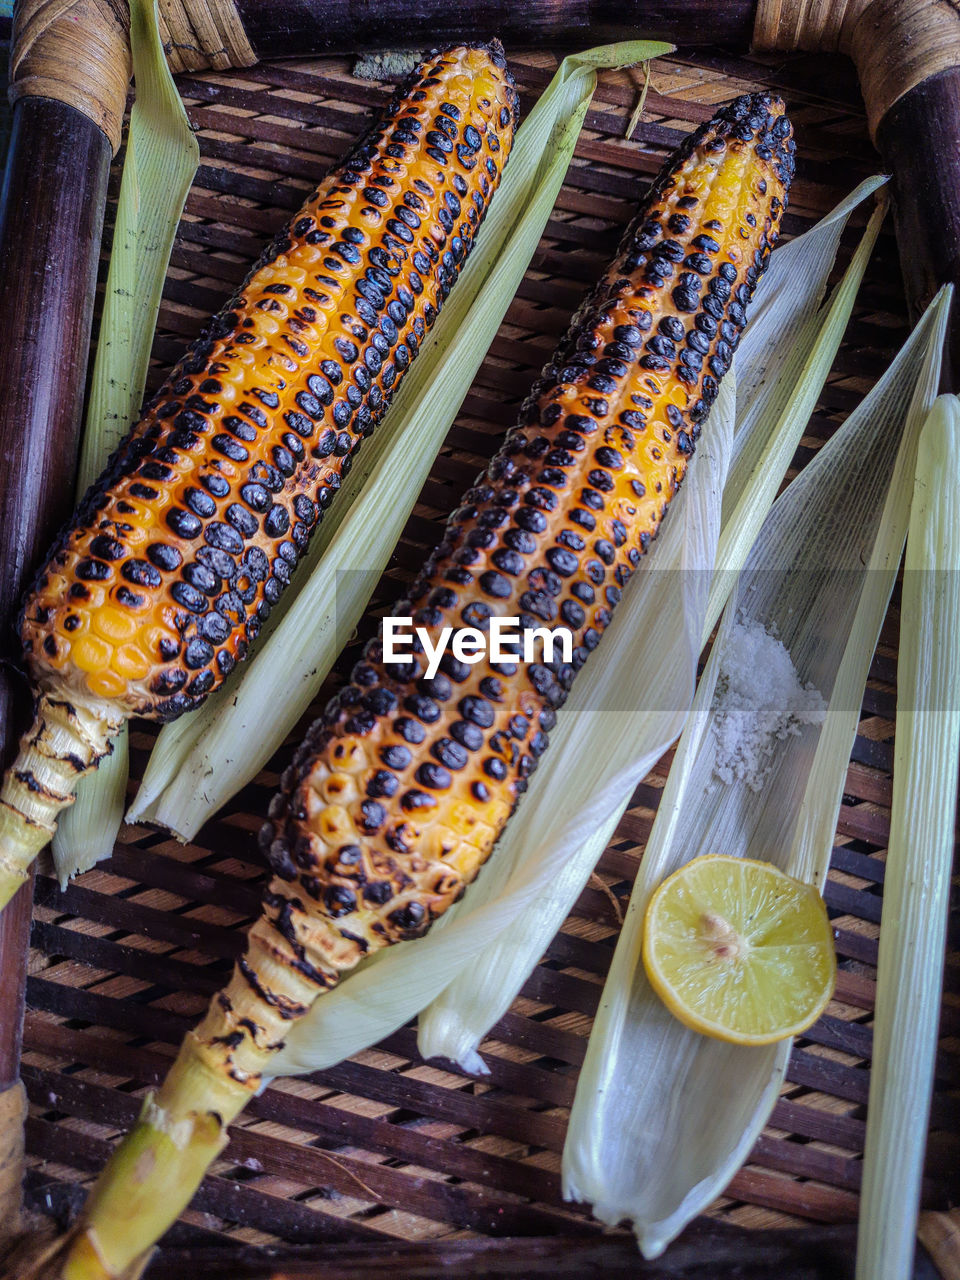 Spicy sweet corn burn in fire with lemon and salt in a wood tray from different angles